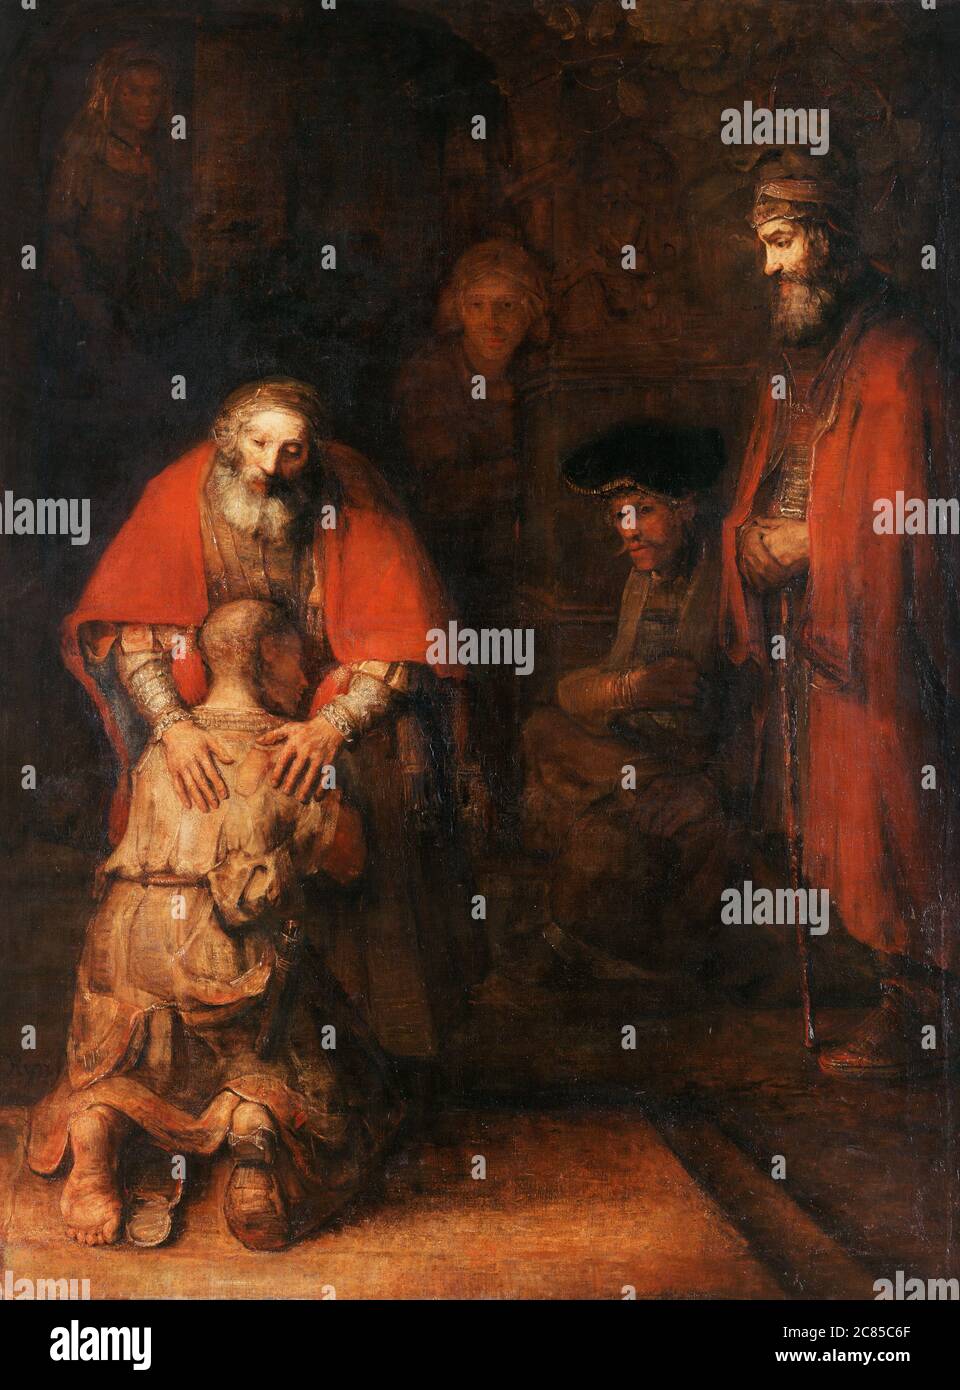 the Return of Prodigal Son by Rembrandt Van Rijn 1669.  Hermitage Museum in Saint Petersburg, Russia Stock Photo